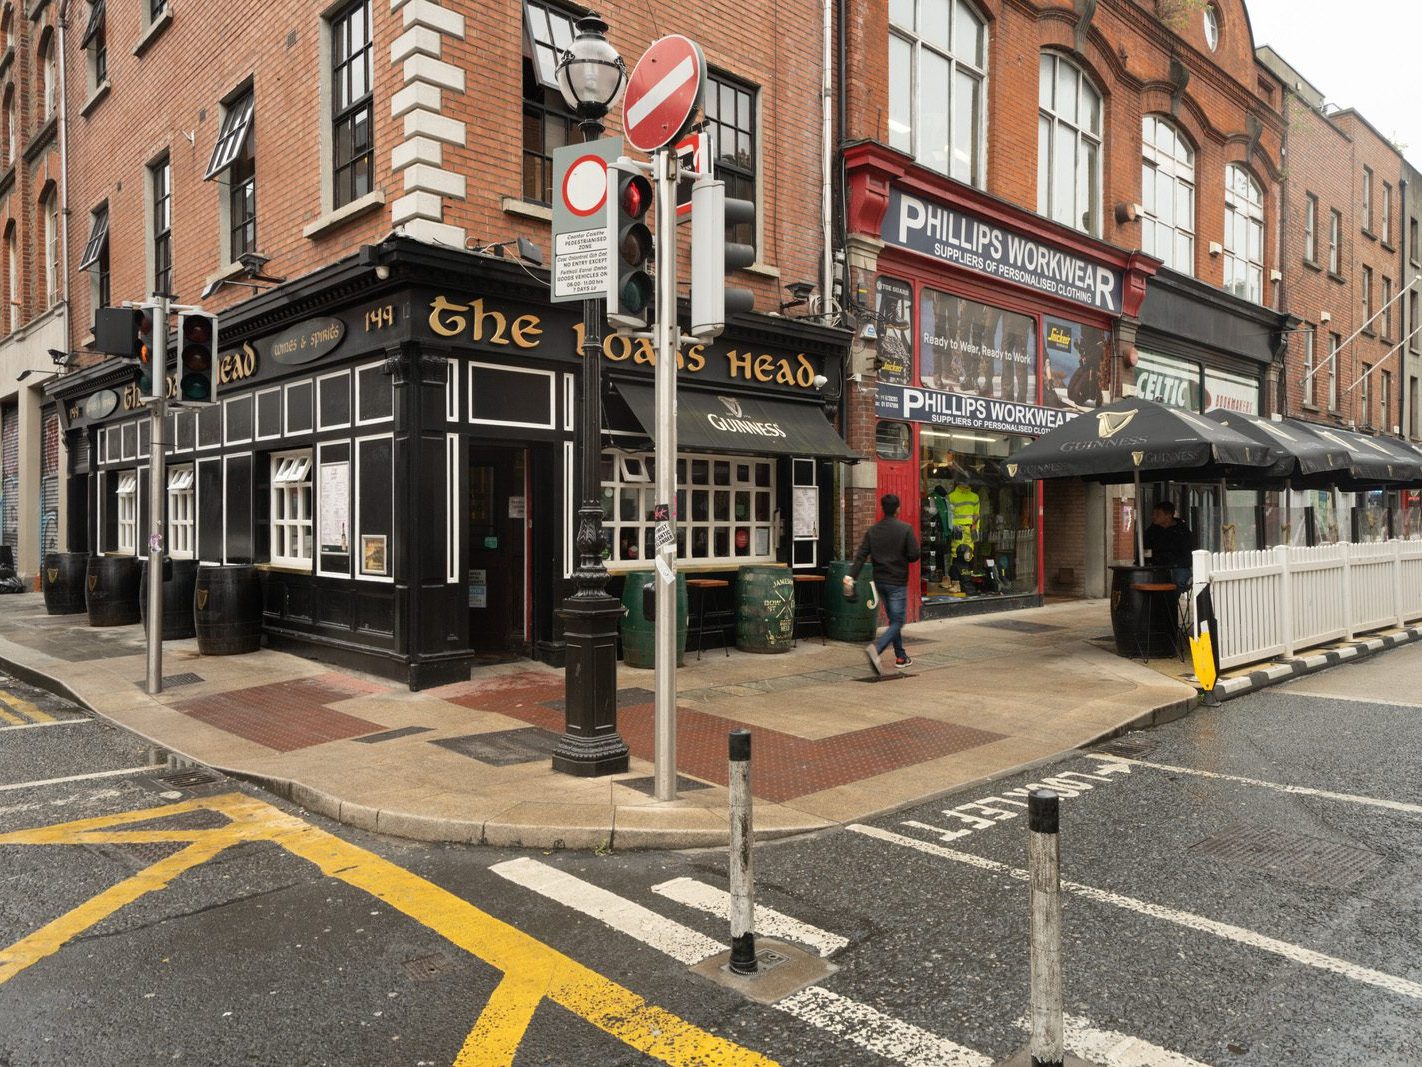 CAPEL STREET ON A DULL WET DAY [INTERIM CAPEL STREET IMPROVEMENT WORKS ARE NOW ONGOING] 023